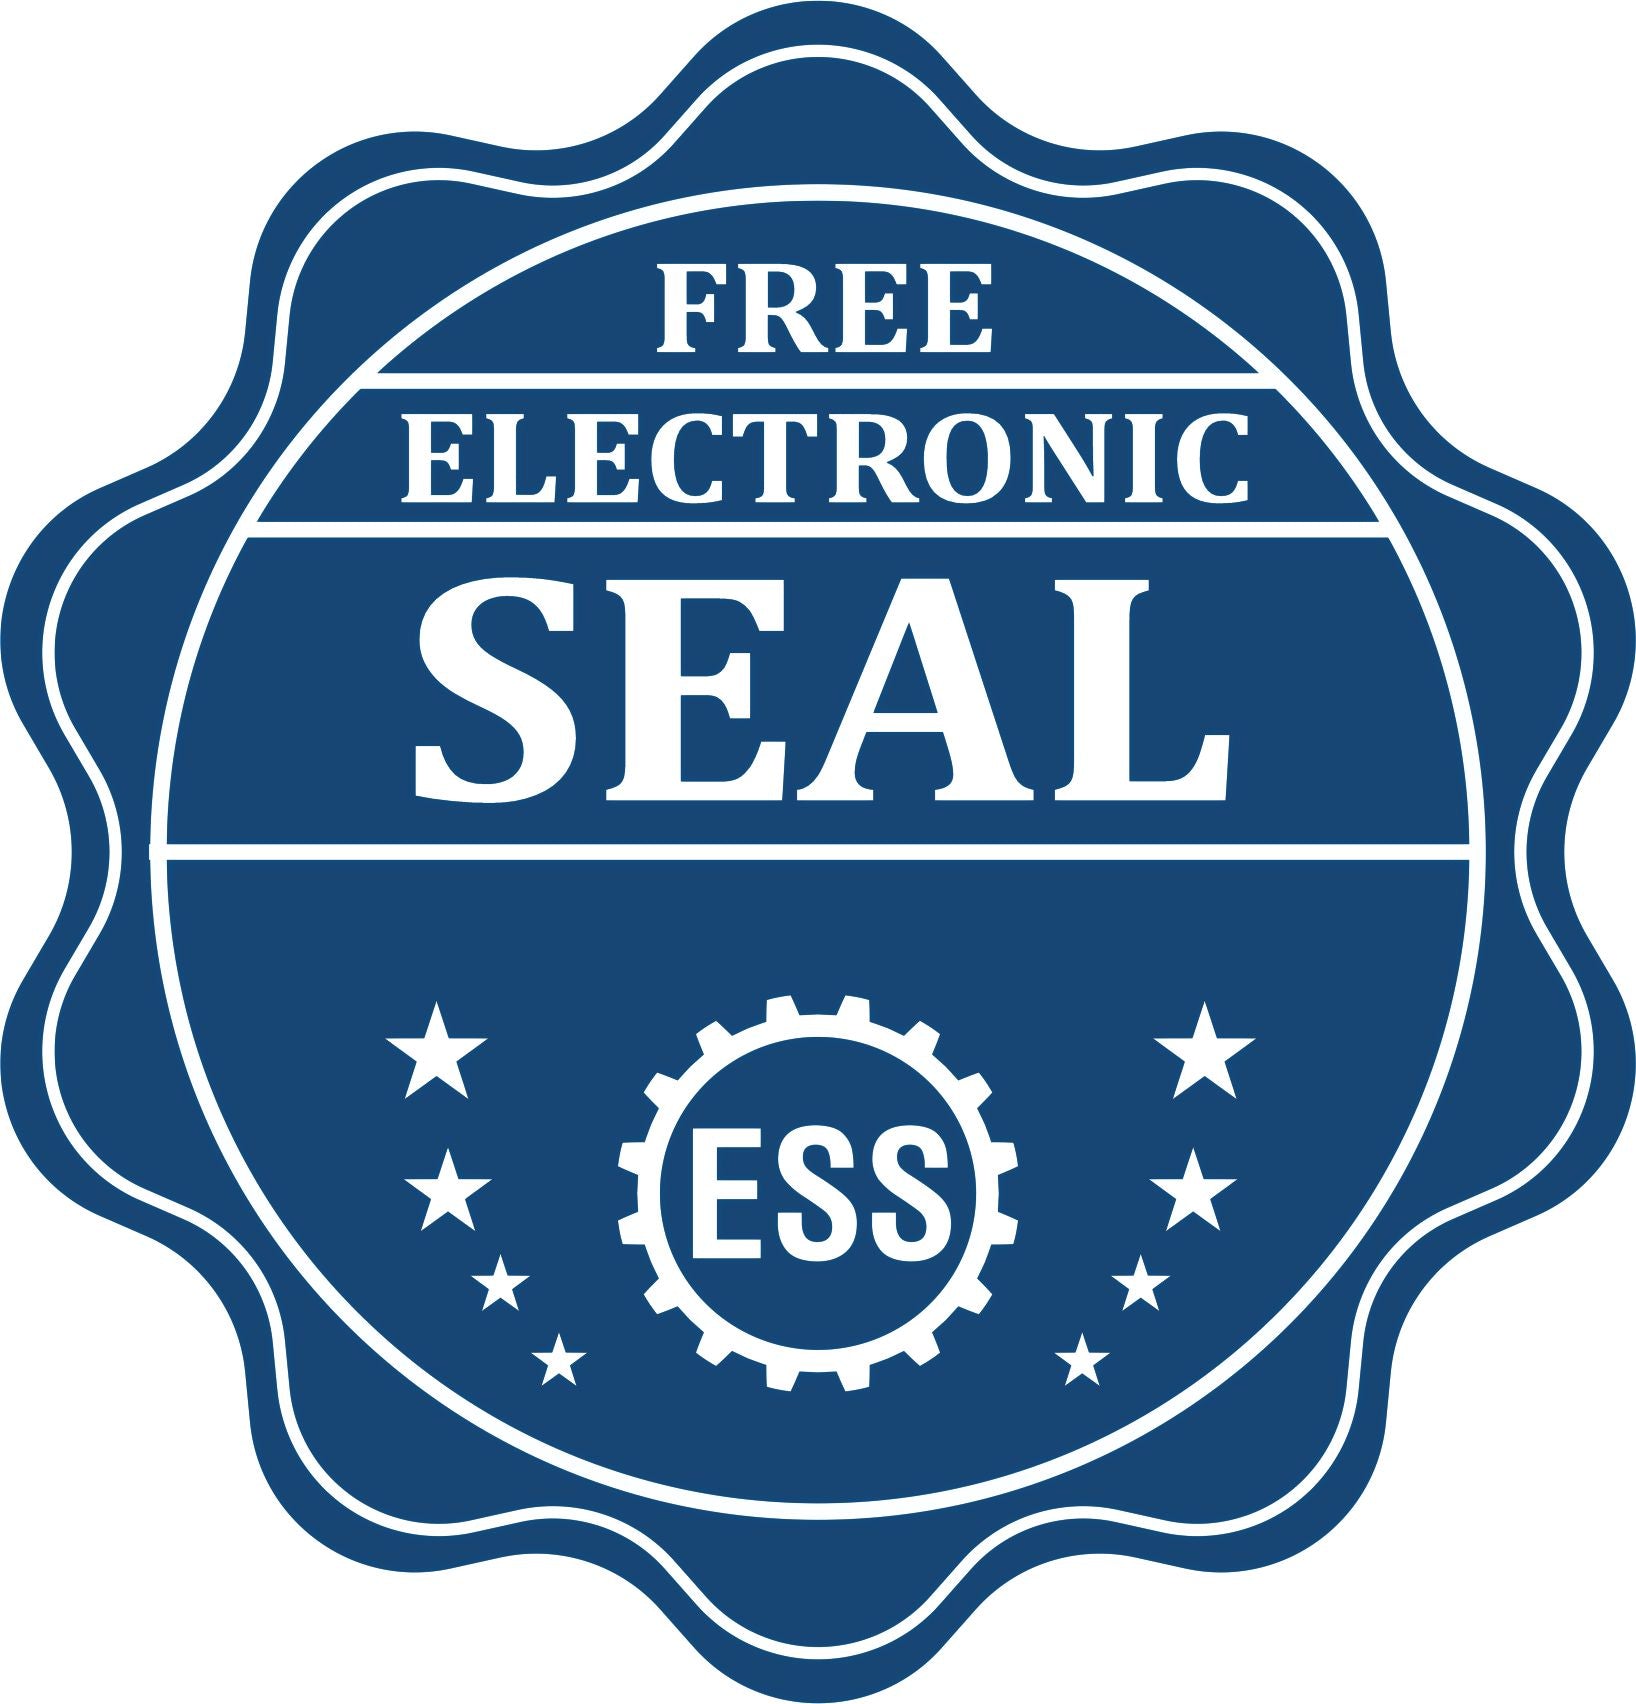 A badge showing a free electronic seal for the Hybrid New Mexico Geologist Seal with stars and the ESS gear on the emblem.